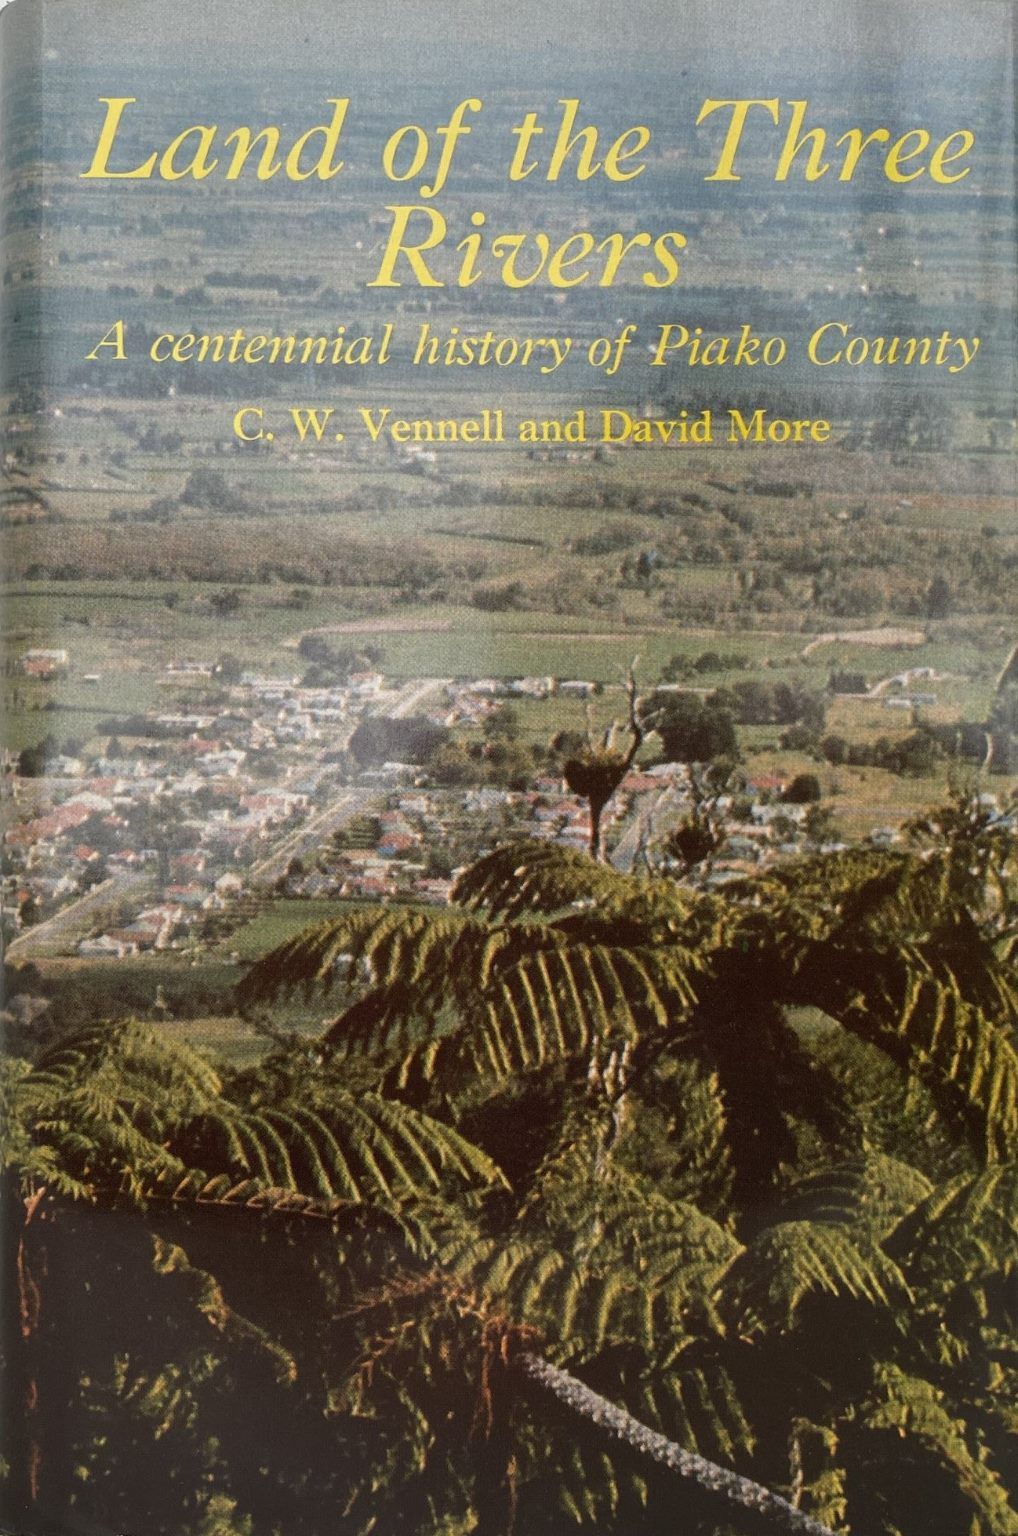 LAND OF THE THREE RIVERS: A Centennial History of Piako County